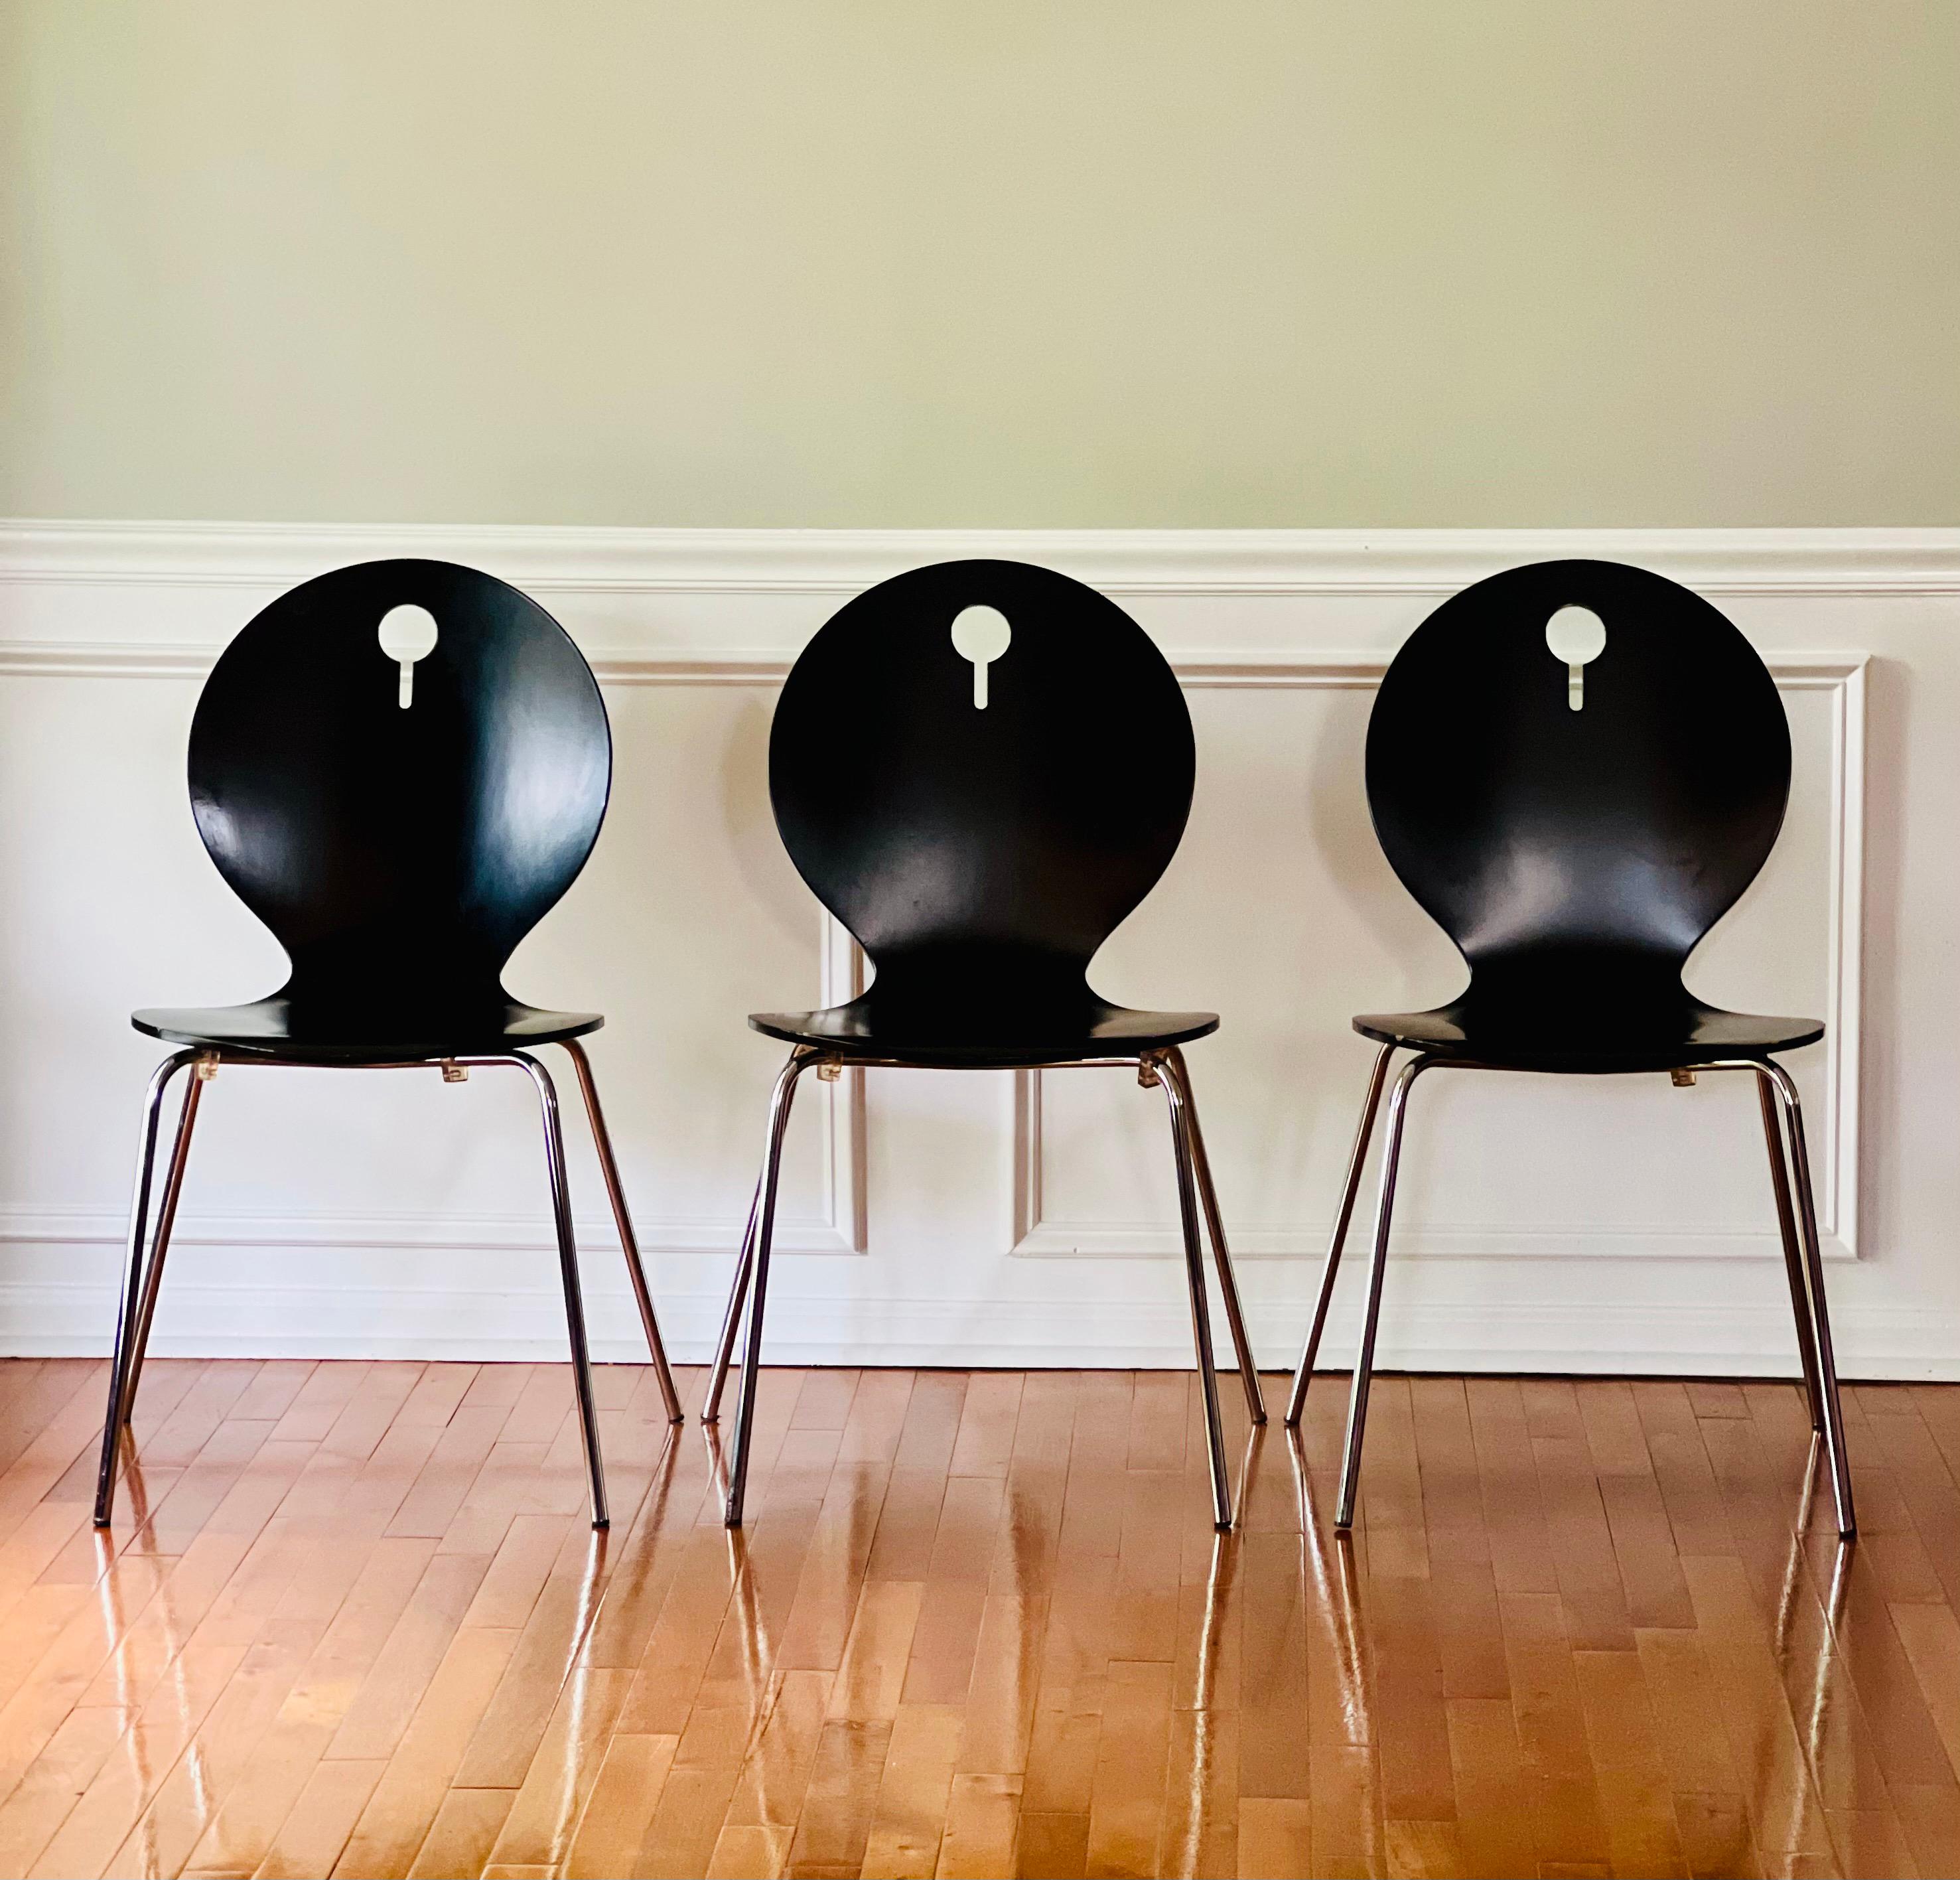 Set of 4 Italian modern stackable bentwood chairs by Calligaris, Italy. 

These versatile chairs are comfortable and ergonomic with a clean, minimalistic design. They feature a decorative cutout in the backrest and a conventional chrome base.